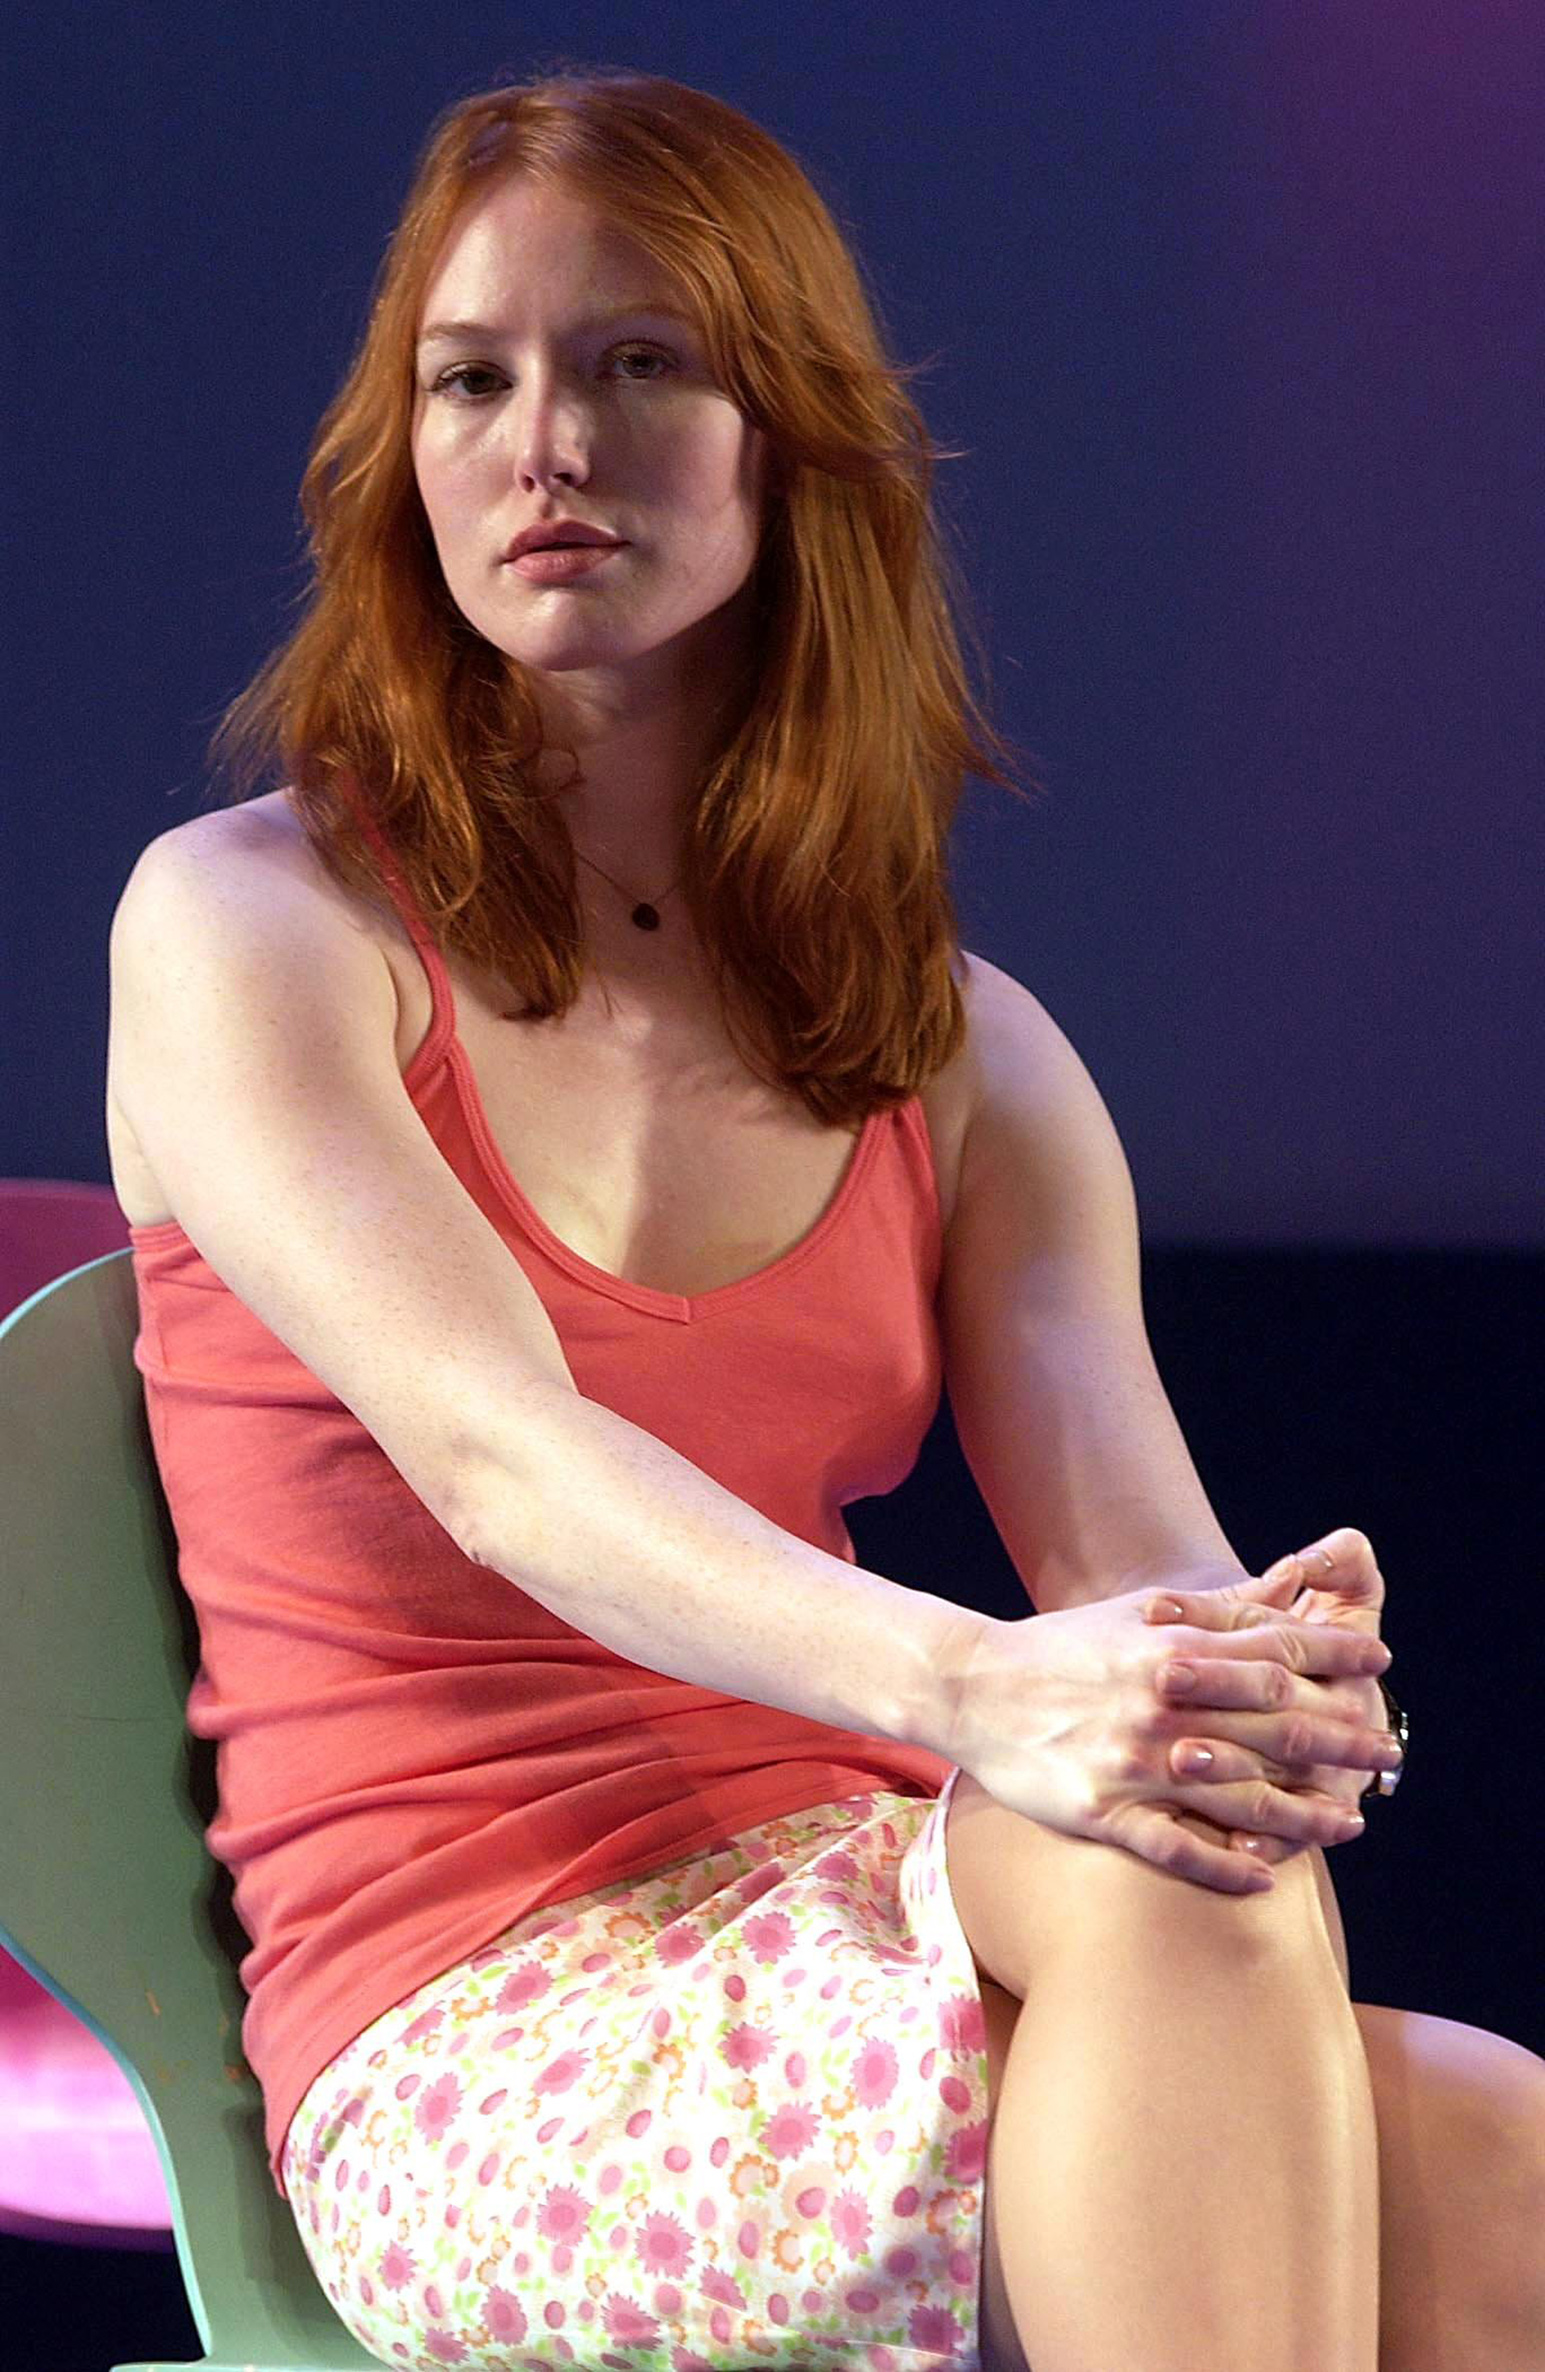 Pictures of Alicia Witt - Pictures Of Celebrities